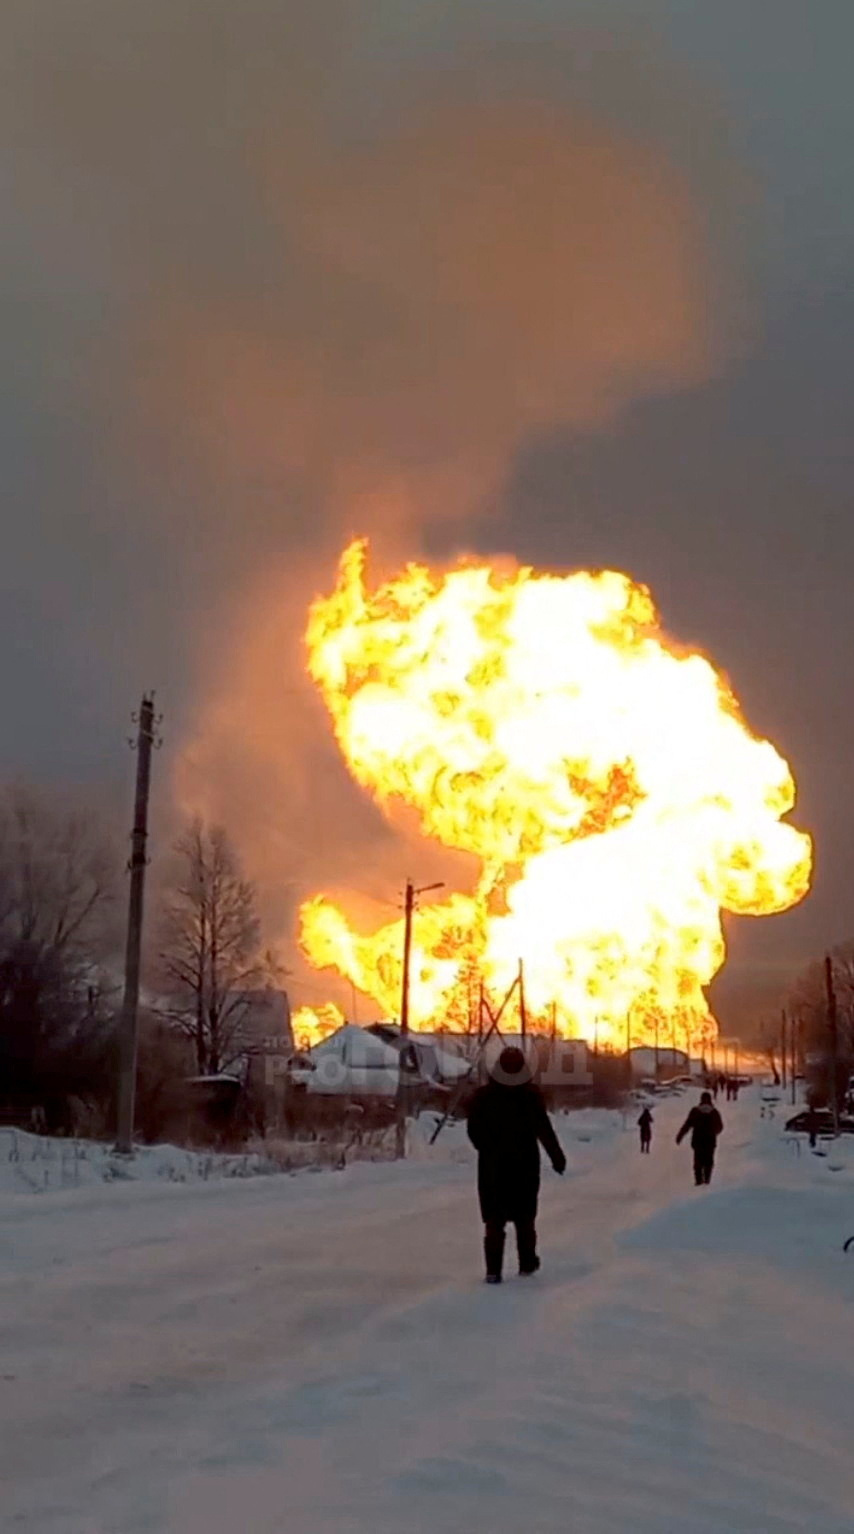 A view shows blaze from a ruptured gas pipeline in the Chuvash Republic